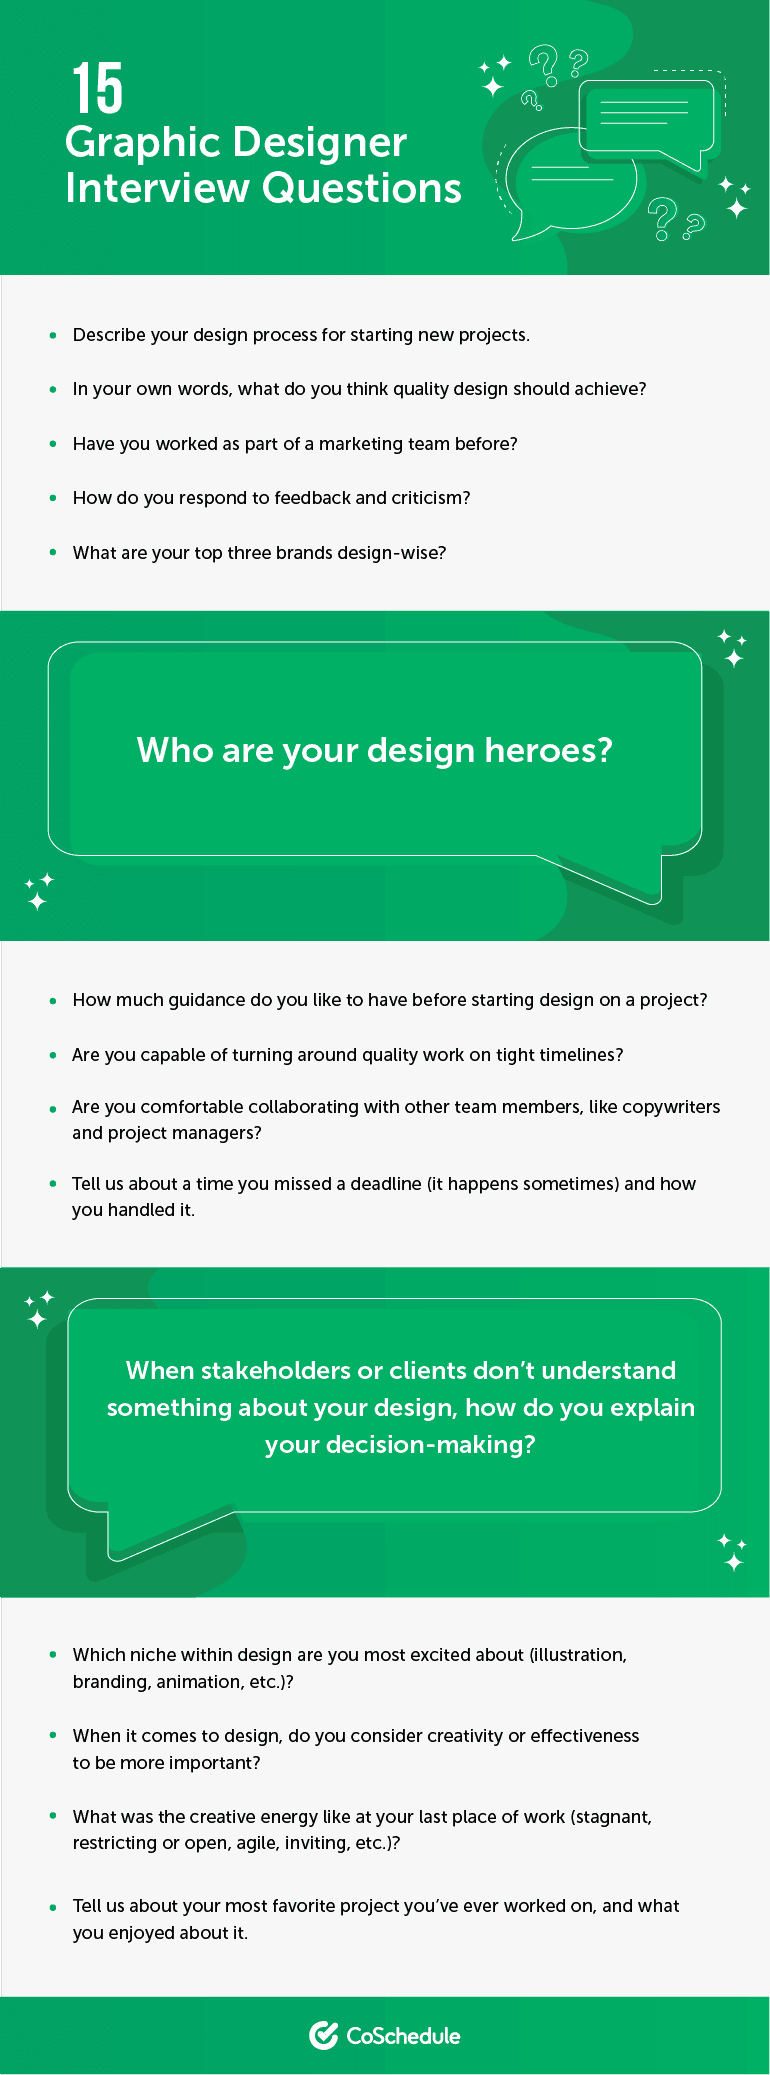 List of 15 Graphic Designer Interview Questions.